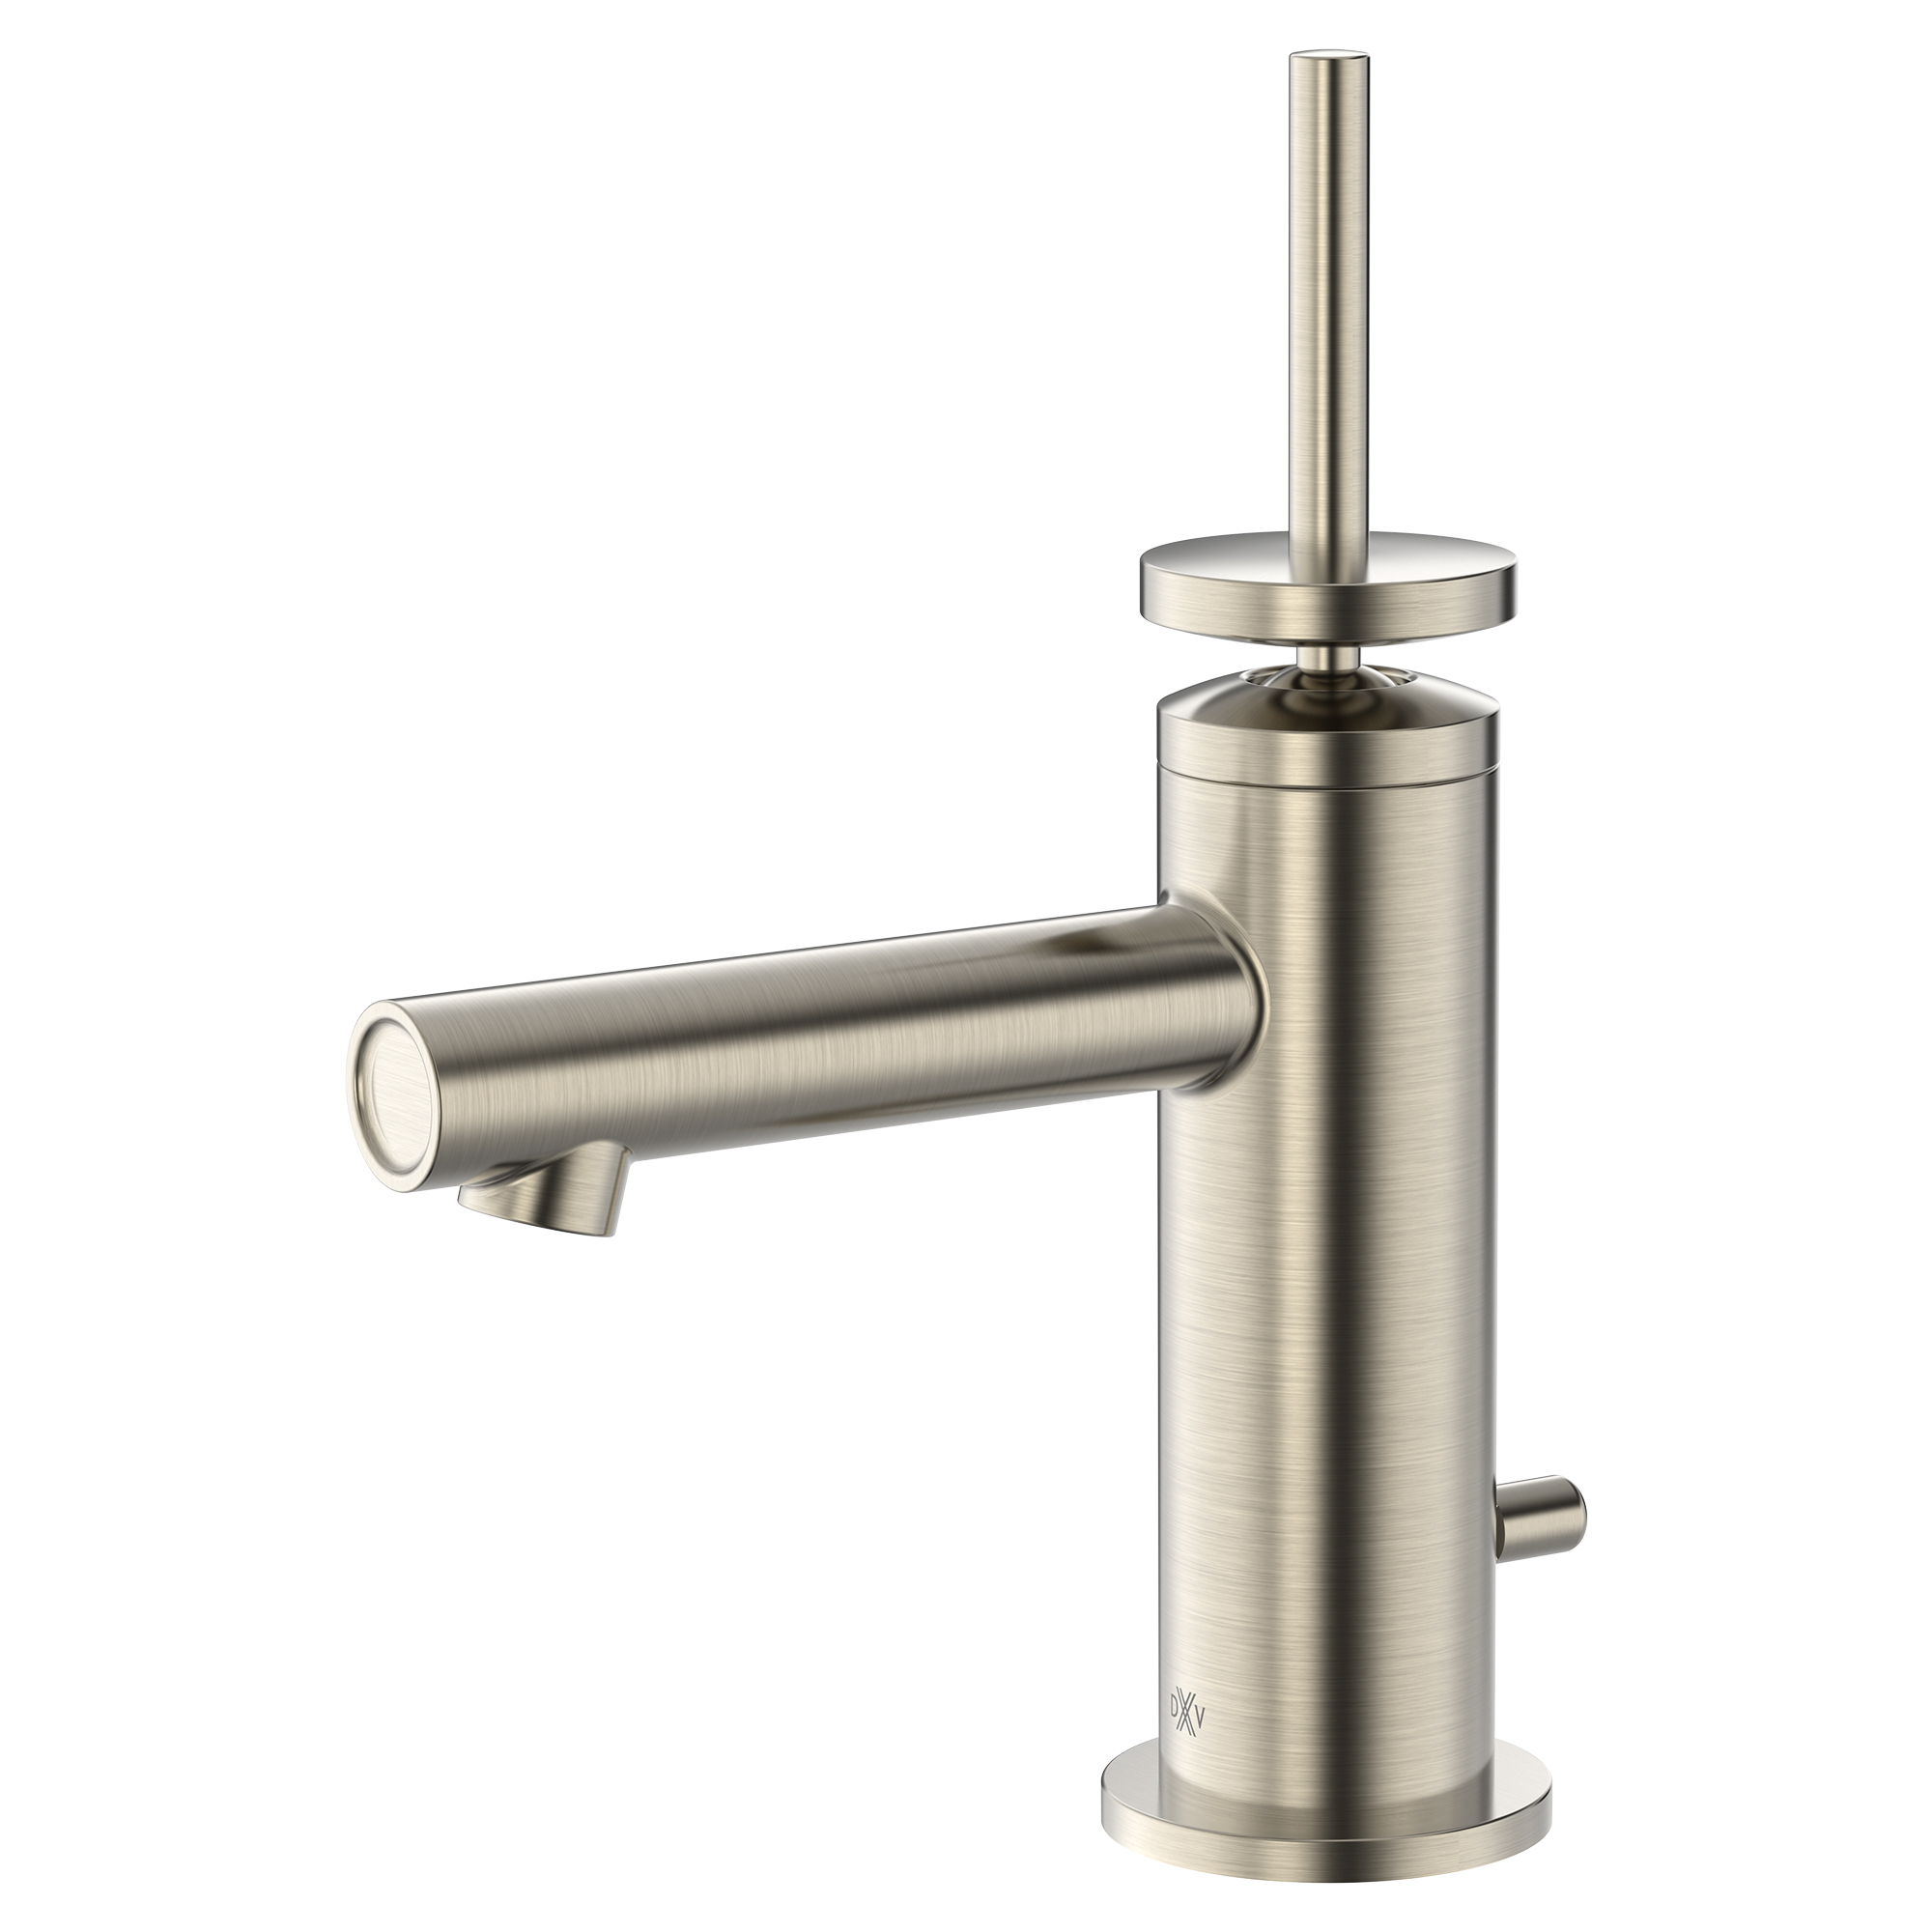 Percy Single Handle Bathroom Faucet with Indicator Markings and Stem Handle